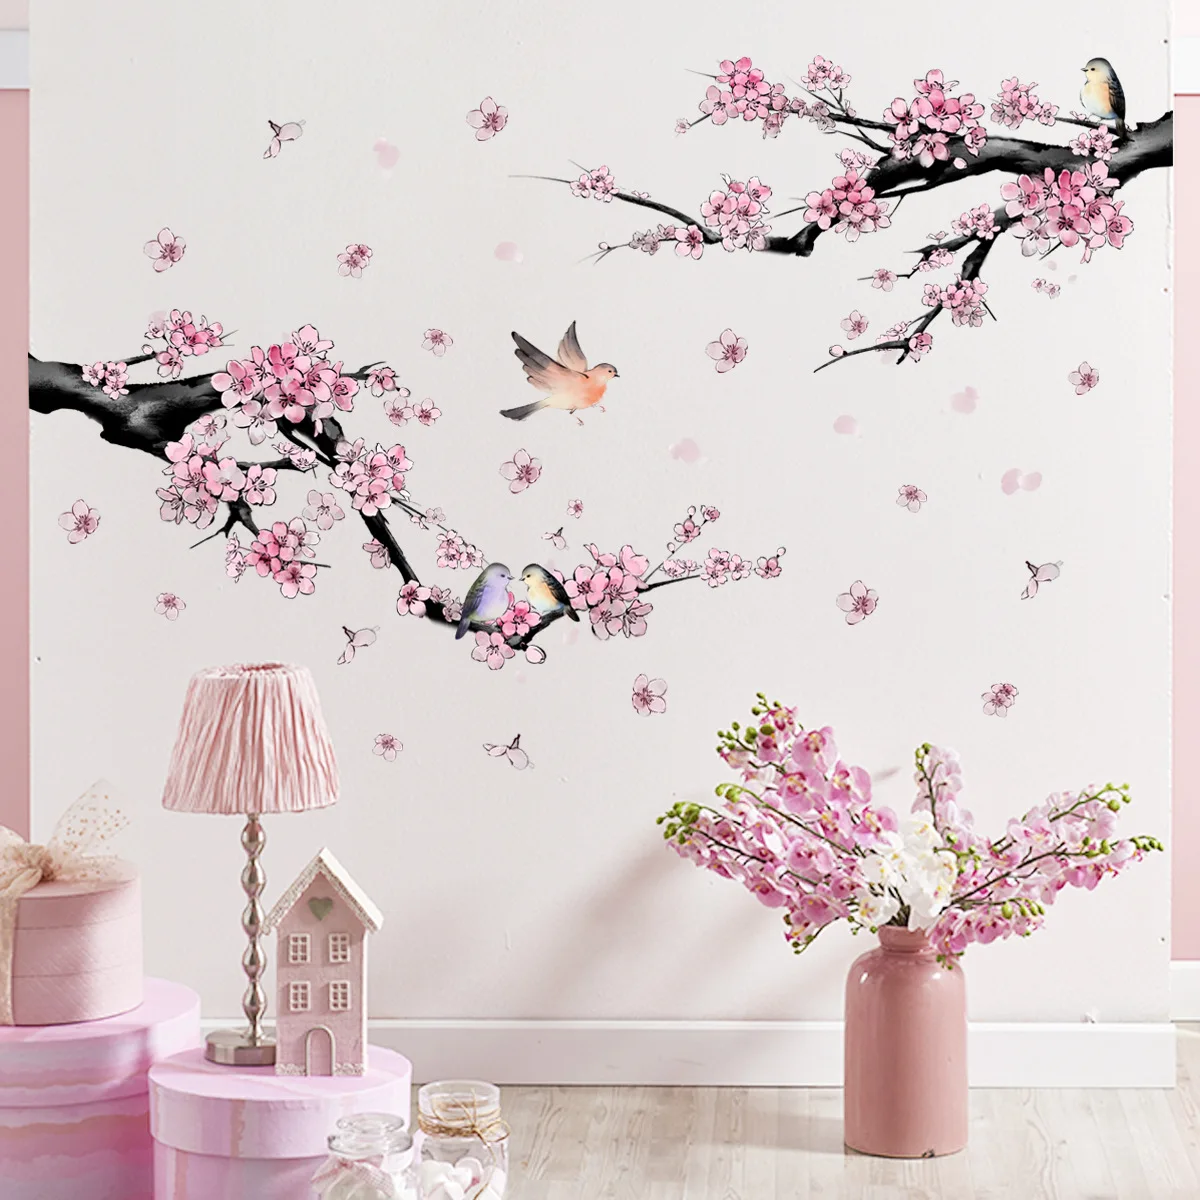 

2pcs Branches Bird Plum Blossom Wall Stickers Background Wall Living Room Bedroom Study Dining Decorative Wall Stickers Ms2260